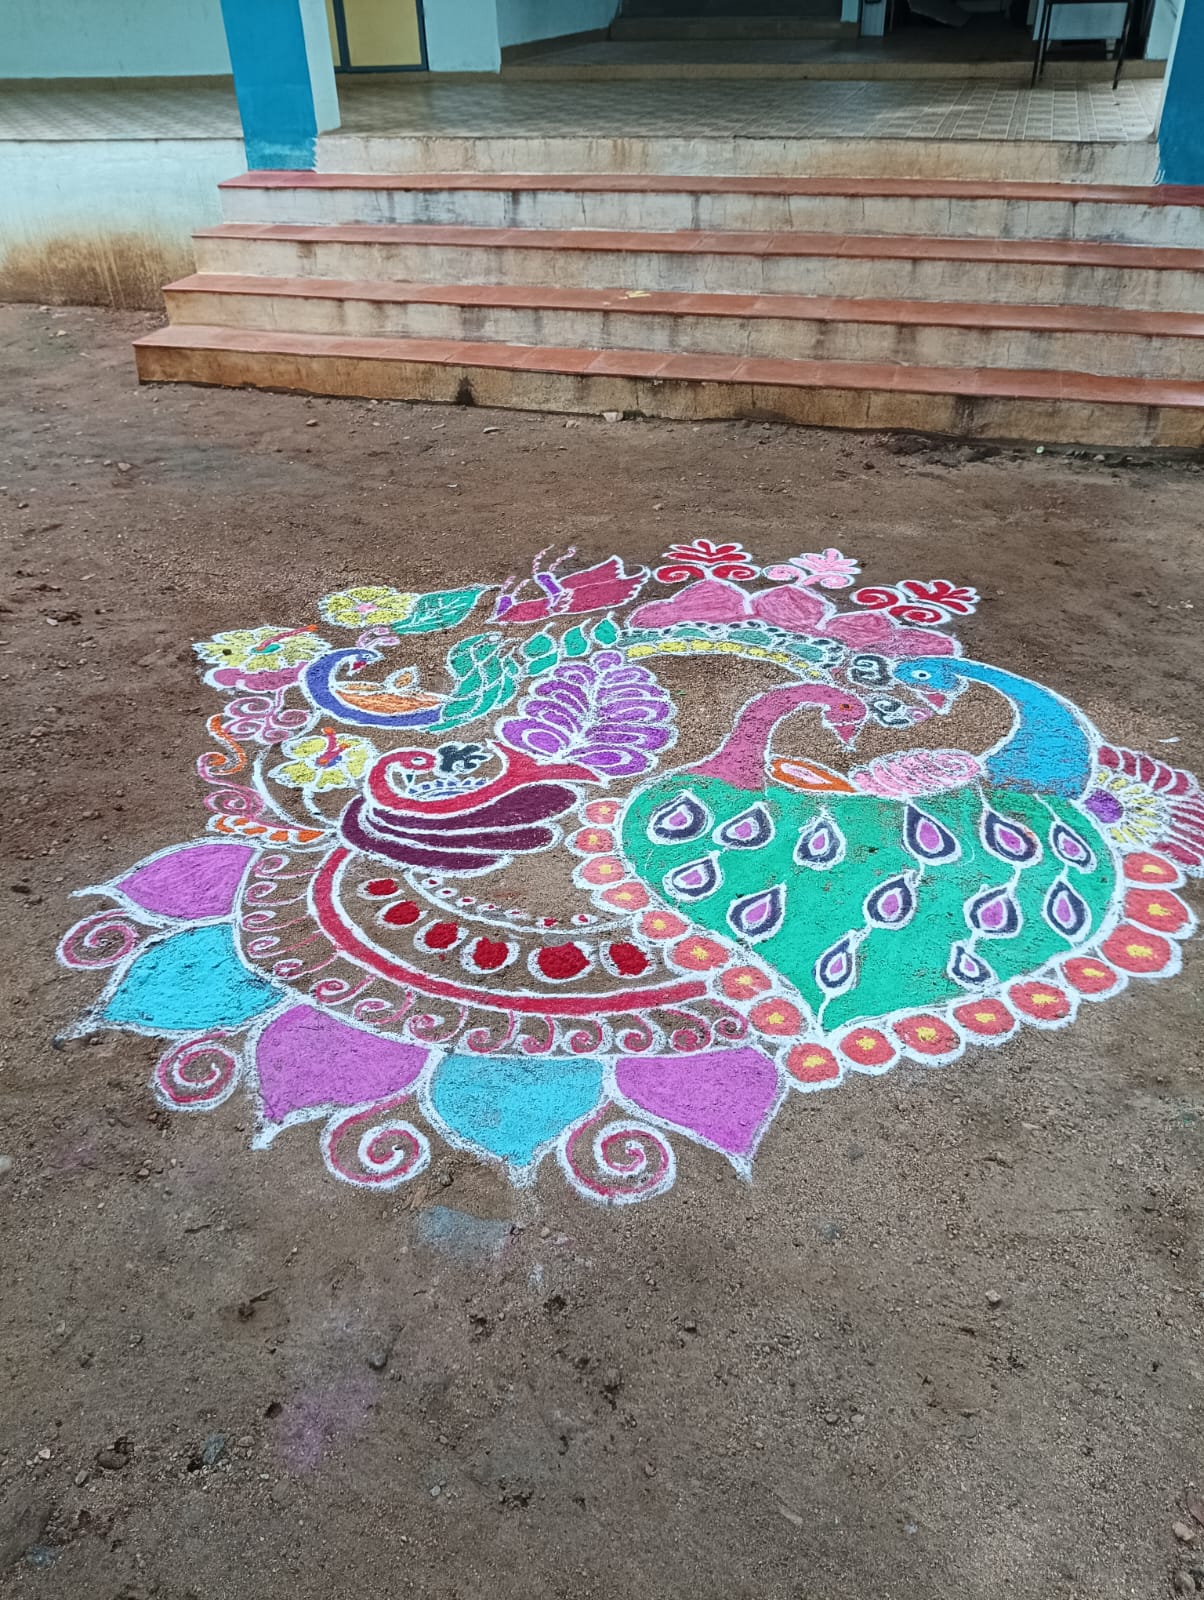 Rangoli competition on account of Pongal Celebration at WASH Institute on 12.01.2023